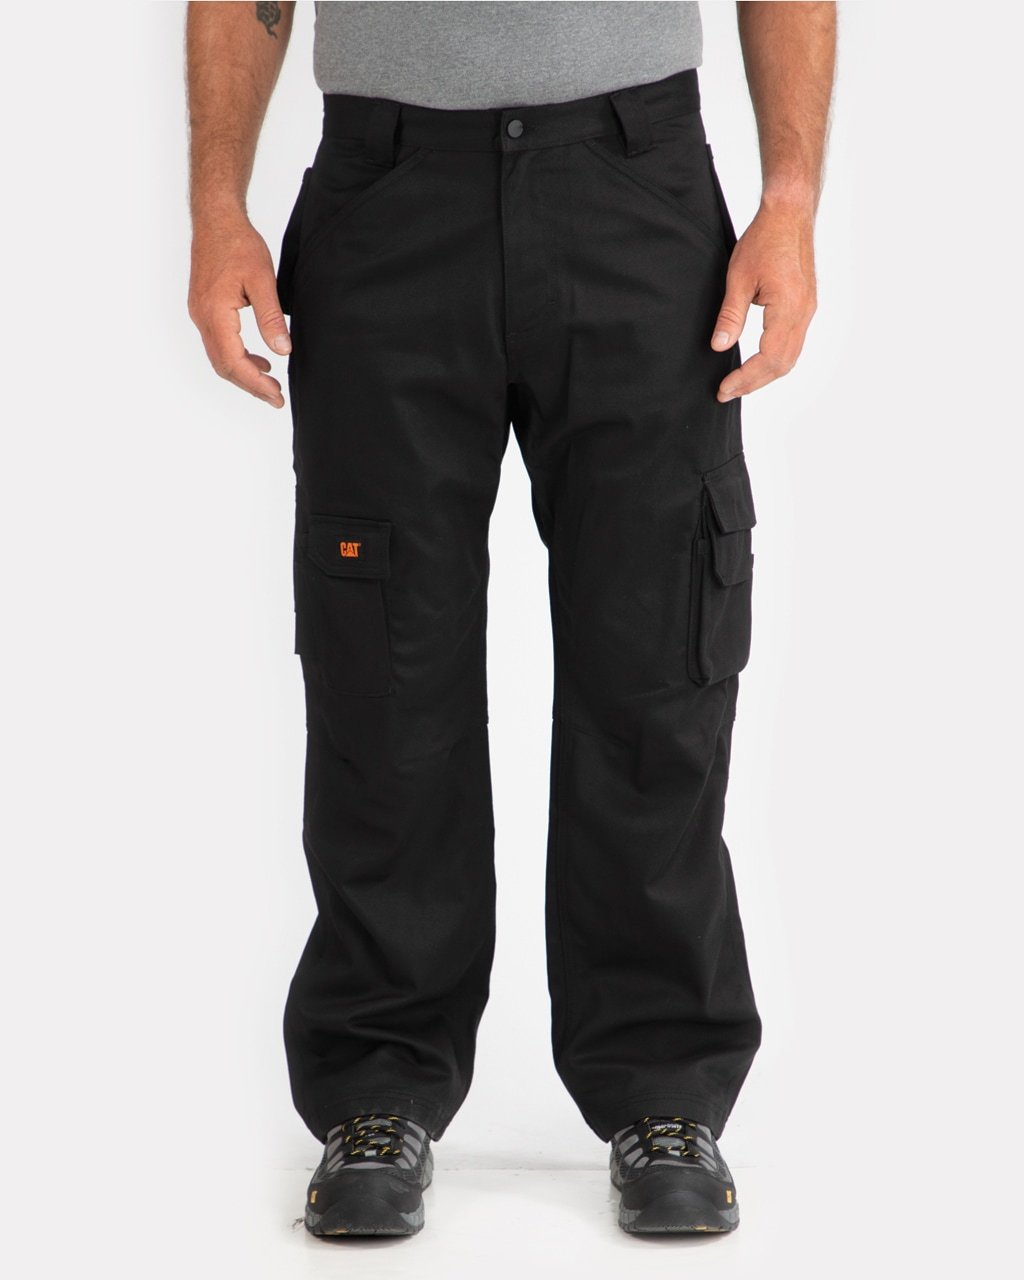 CAT Men's Flame Resistant Cargo Pant - Work World - Workwear, Work Boots, Safety Gear